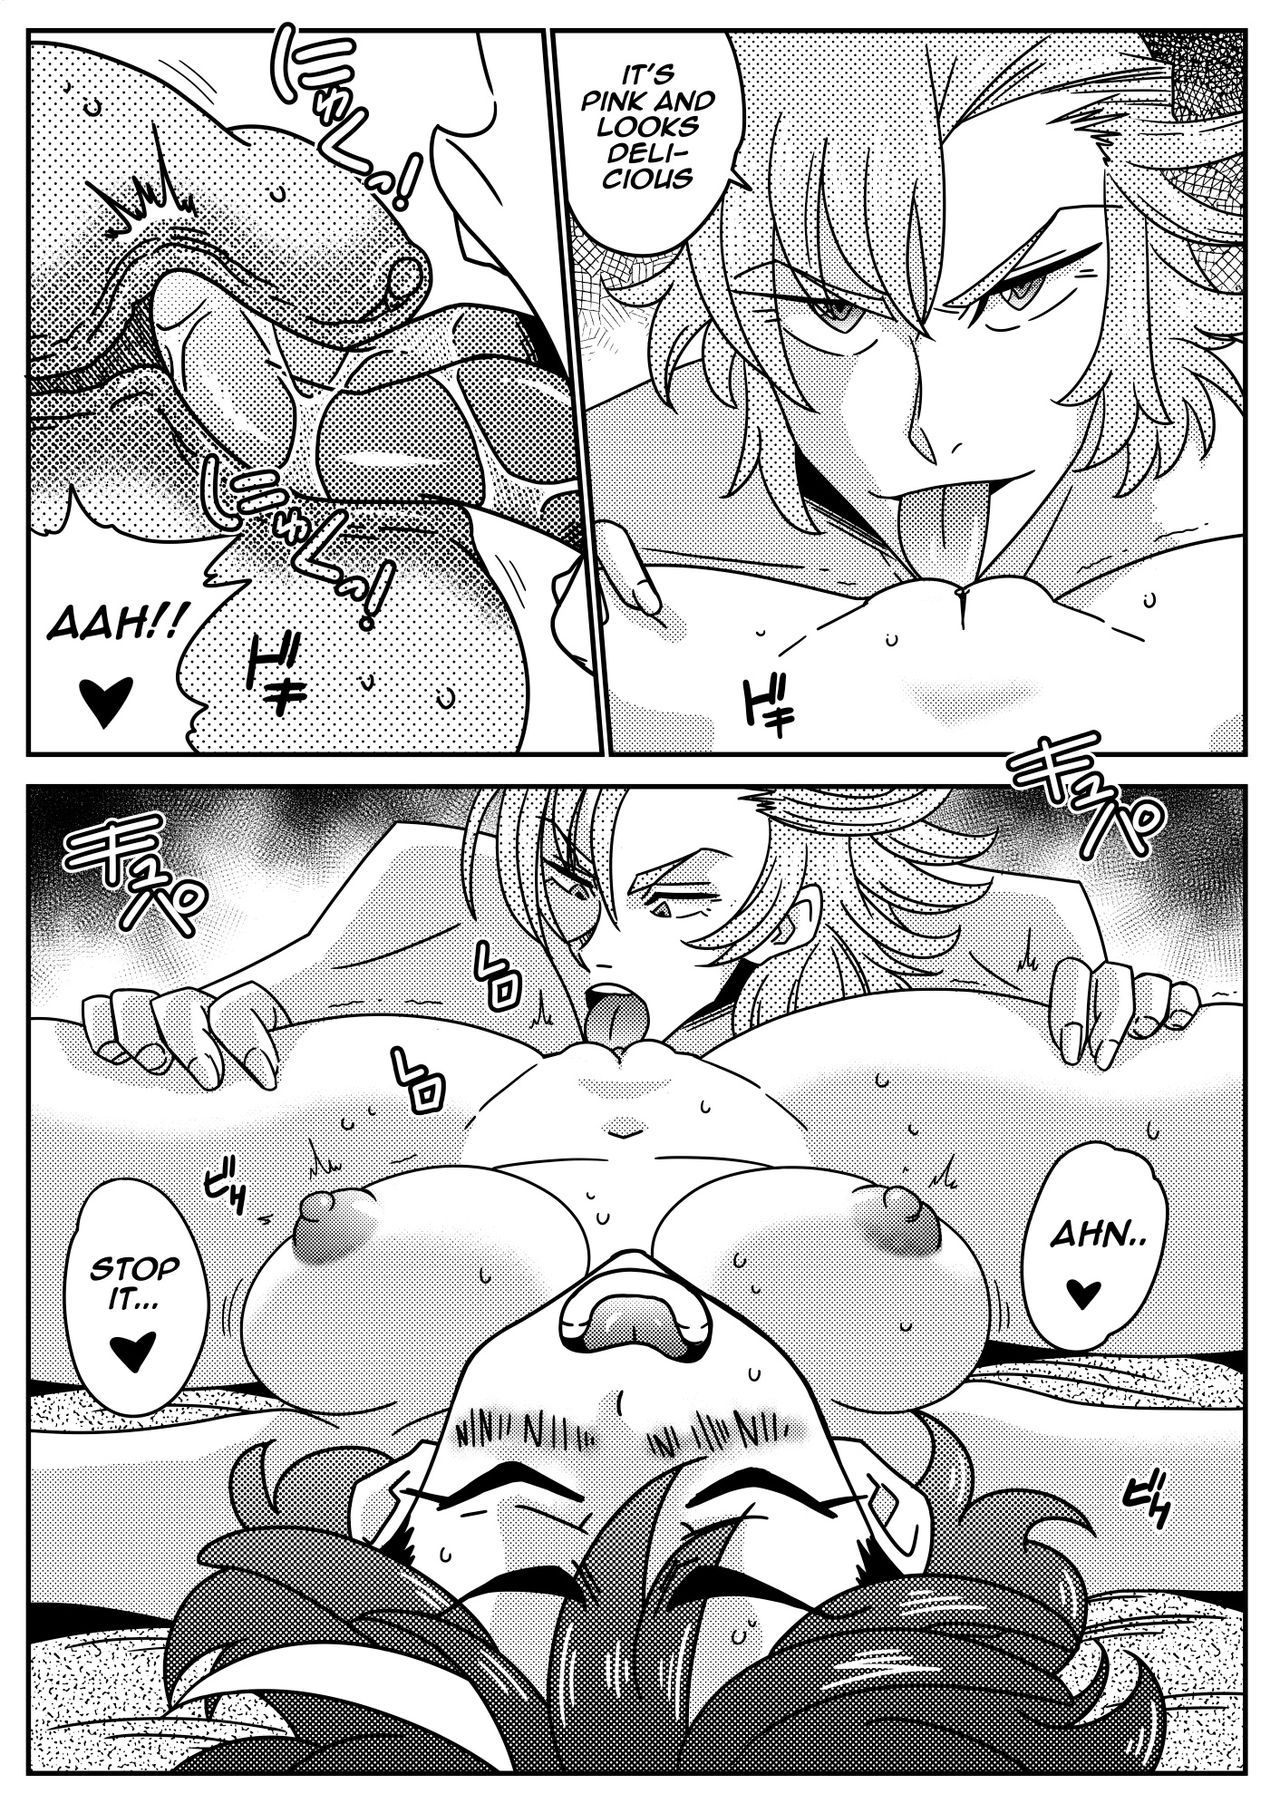 Yamamoto Doujinshi Uncensored Page and Sketch Collection 13